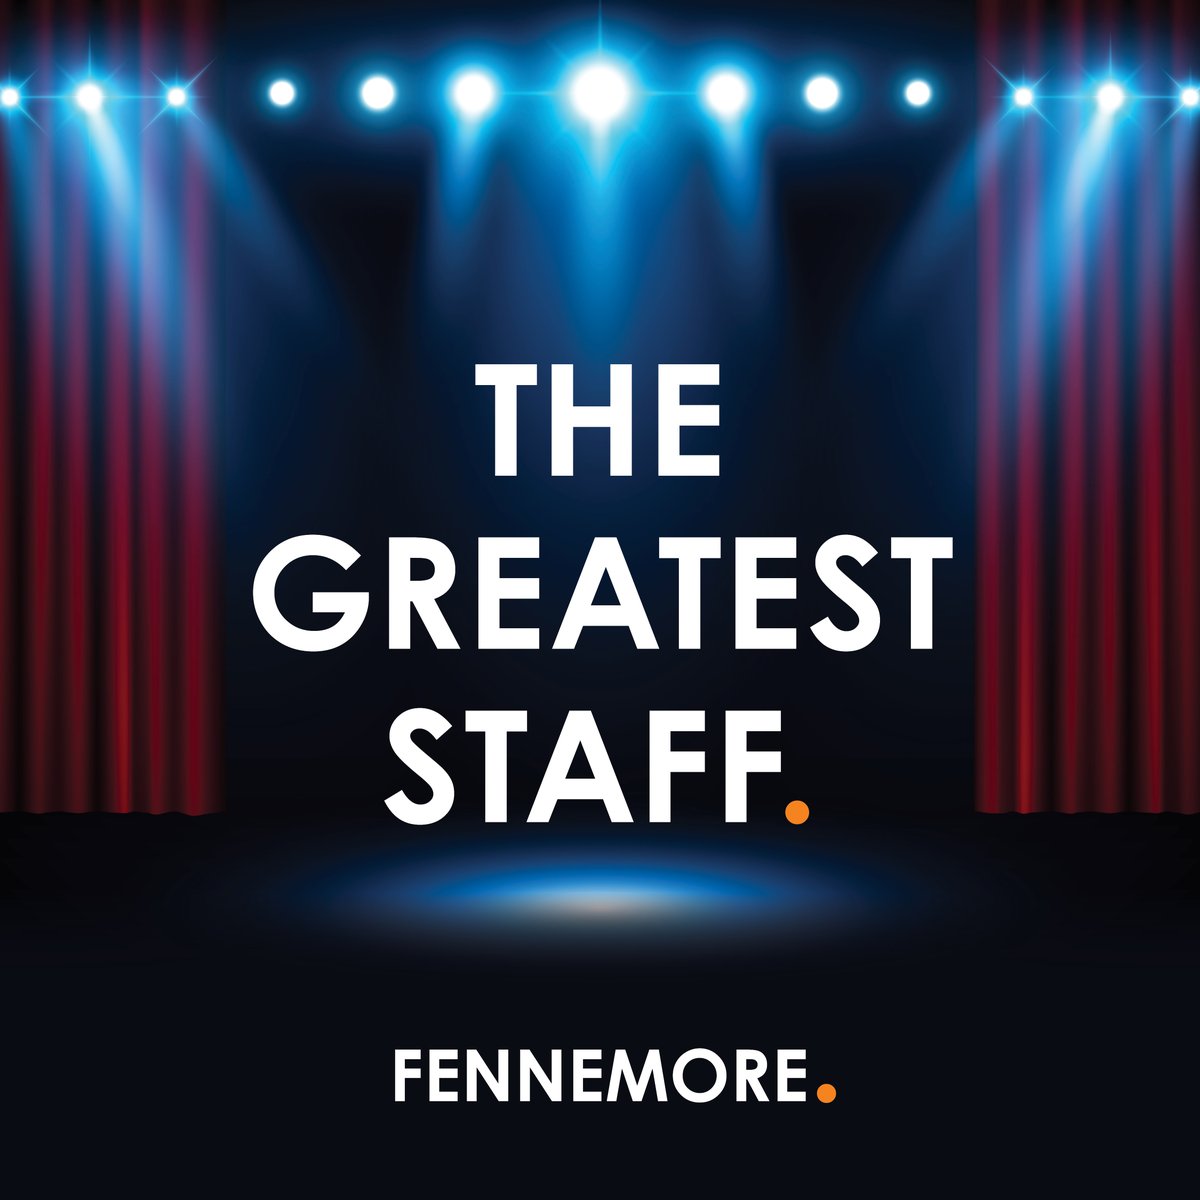 Calling Fennemore legal professionals! Today we celebrated you during our Staff Appreciation Day and can’t wait to spotlight our legal professionals across the nation tomorrow.  We really do have the greatest Staff!

#AllHandsMeeting #LegalProfessionals #Fennemore